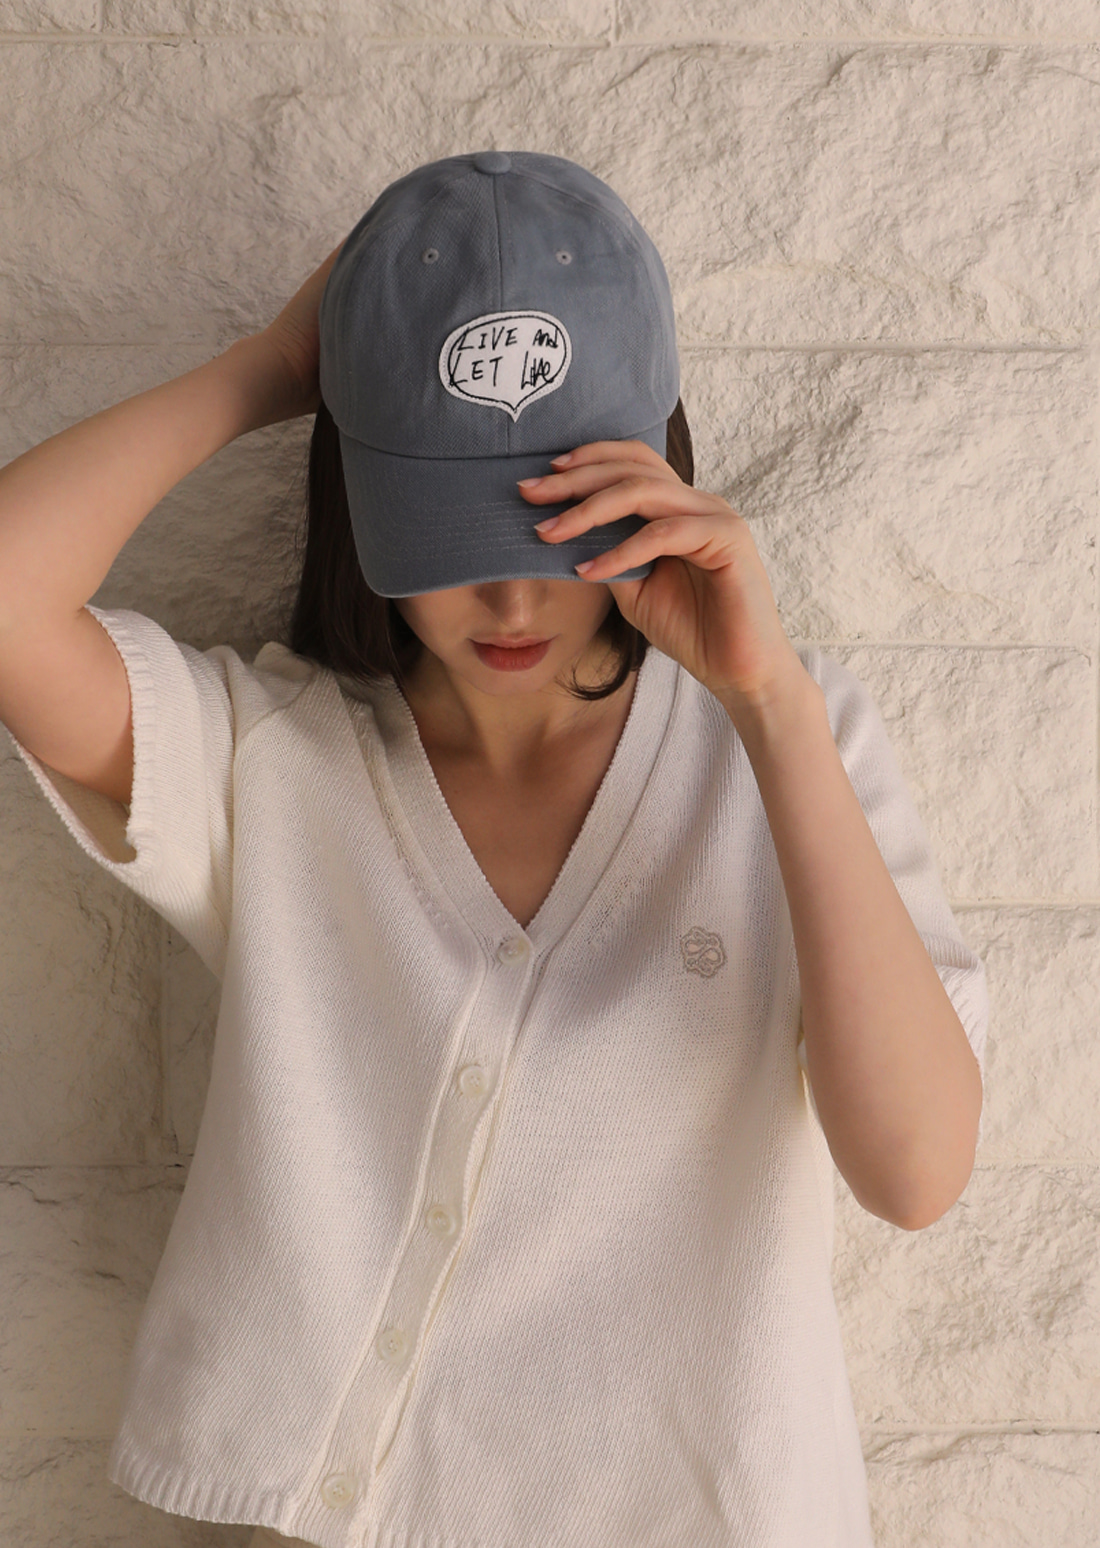 LIVE AND LET LIVE ball cap(Skyblue) x MIN KYUNGHEE